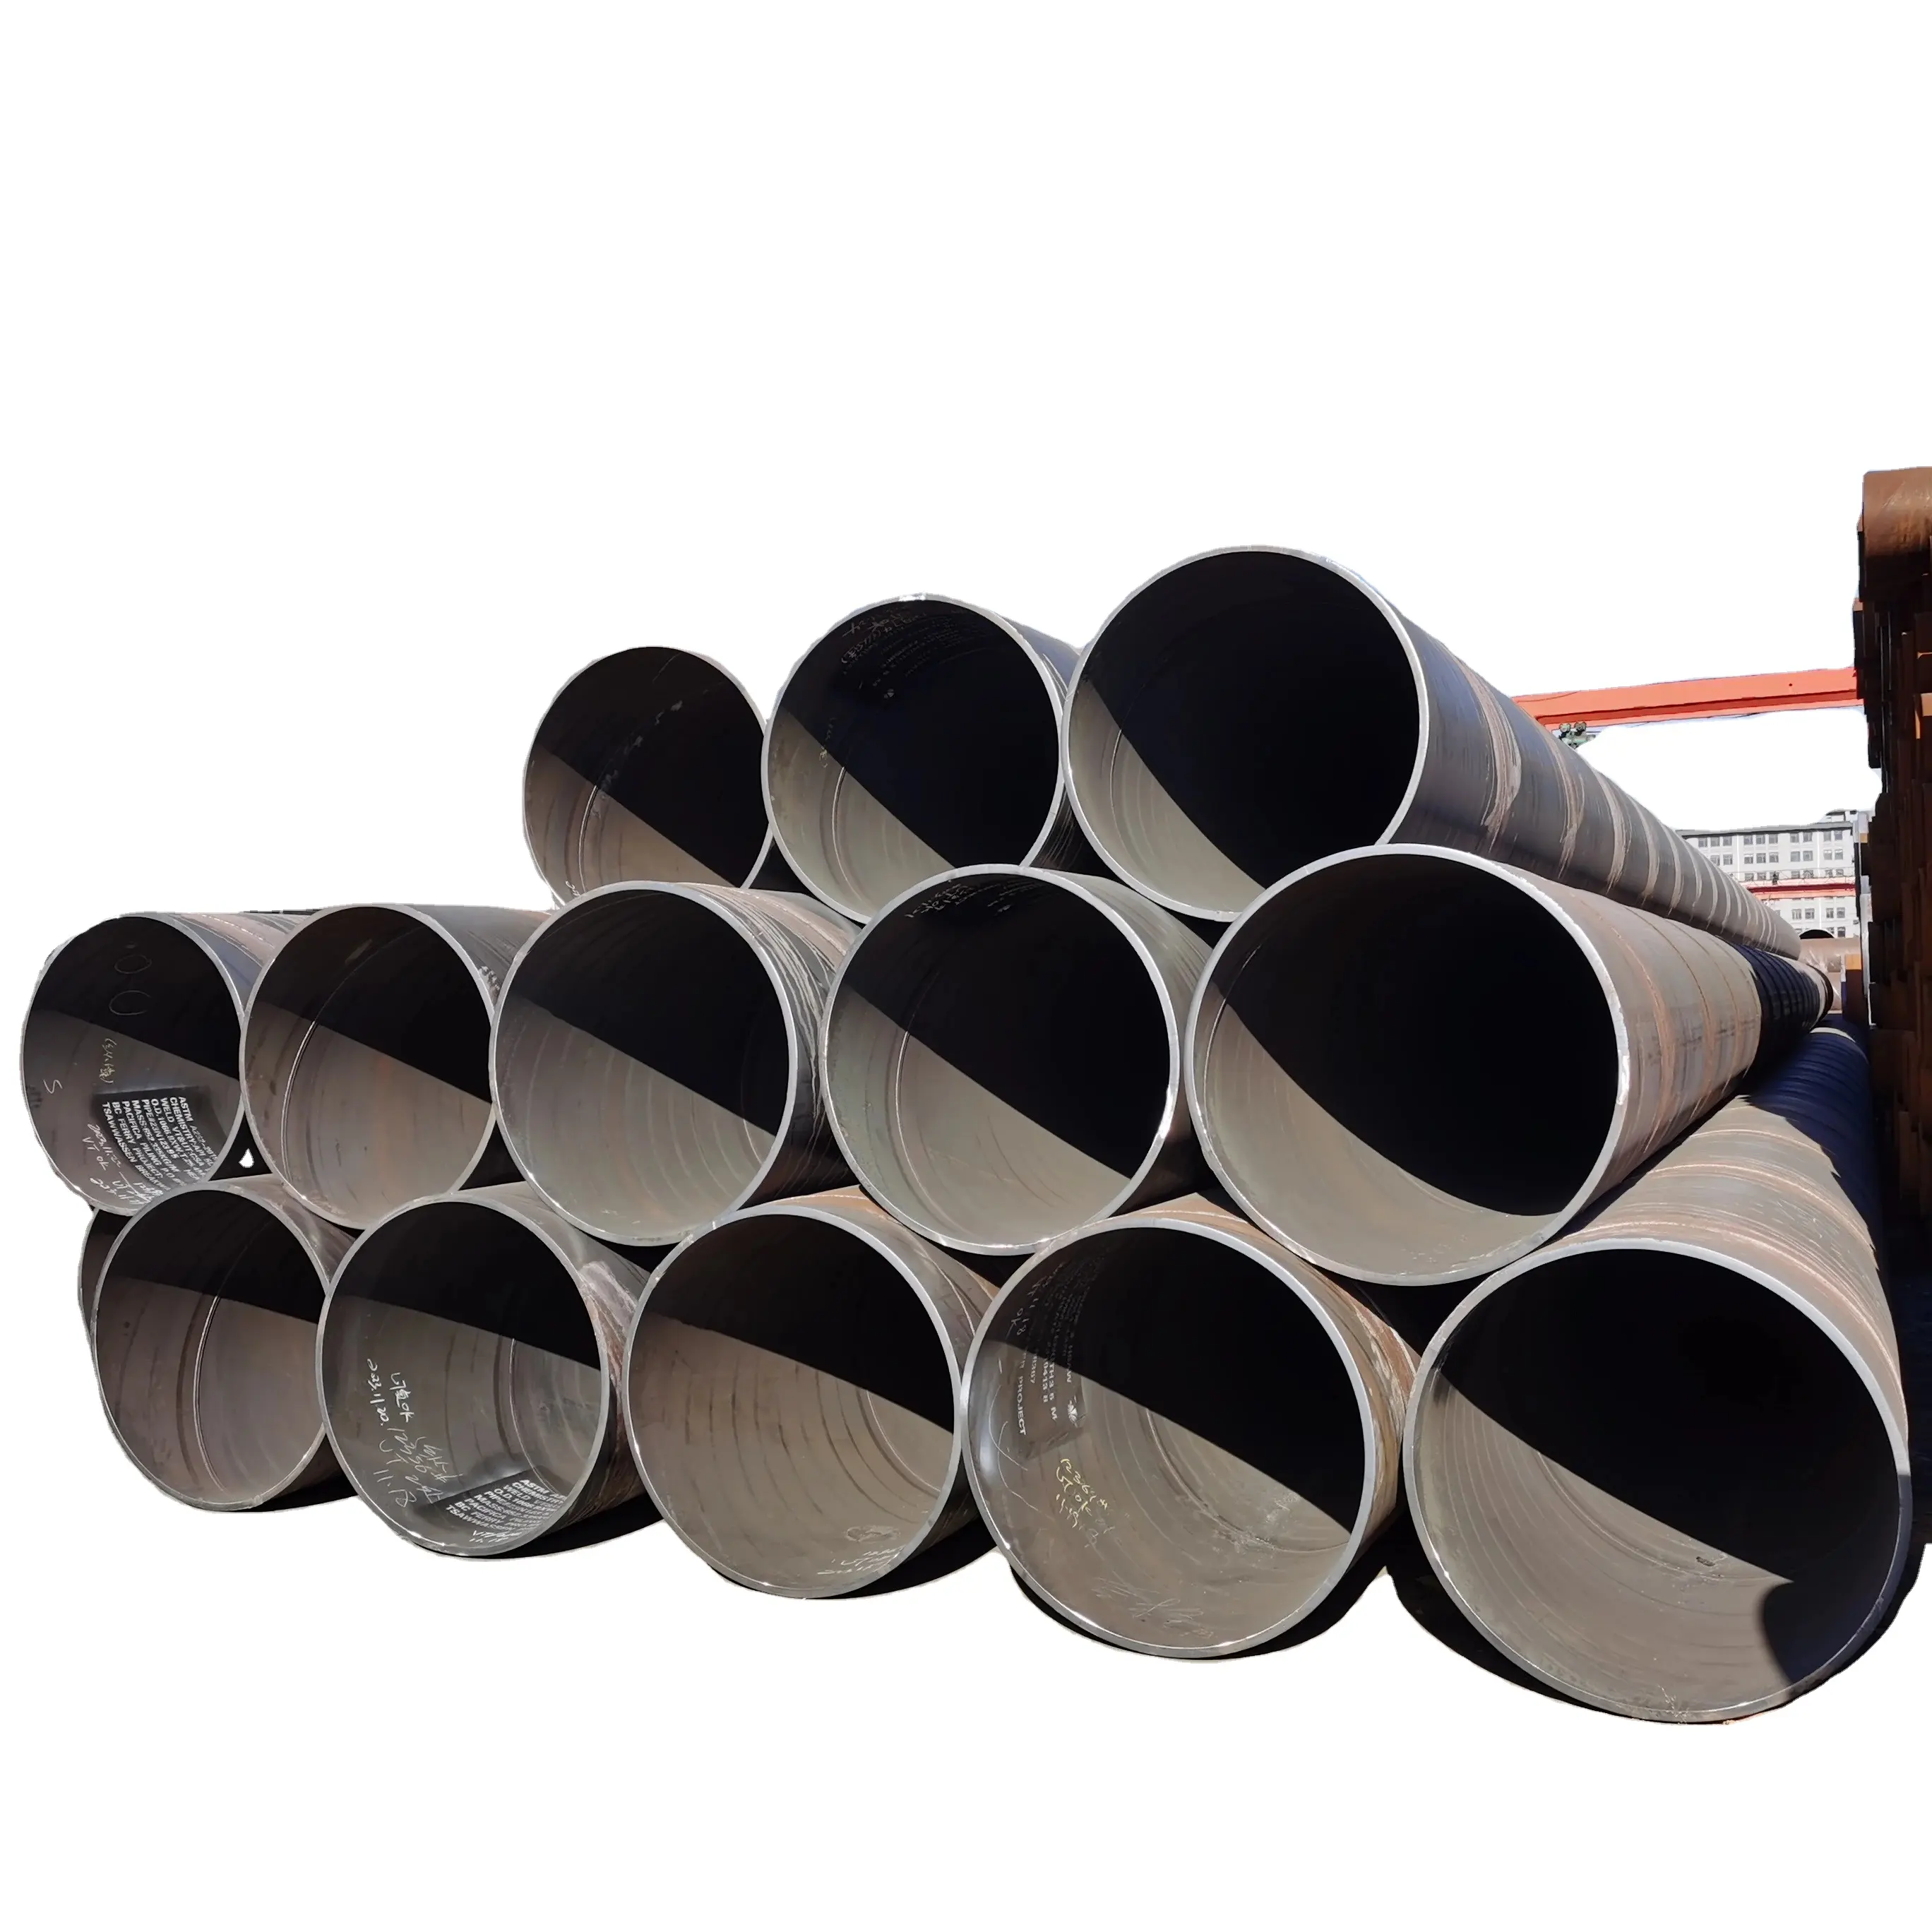 Large Diameter Q235 Spiral Steel Pipe Anti-Corrosion Welded Steel Pipes Manufacturer Stock for Sewage Supply Welding Iron Pipe